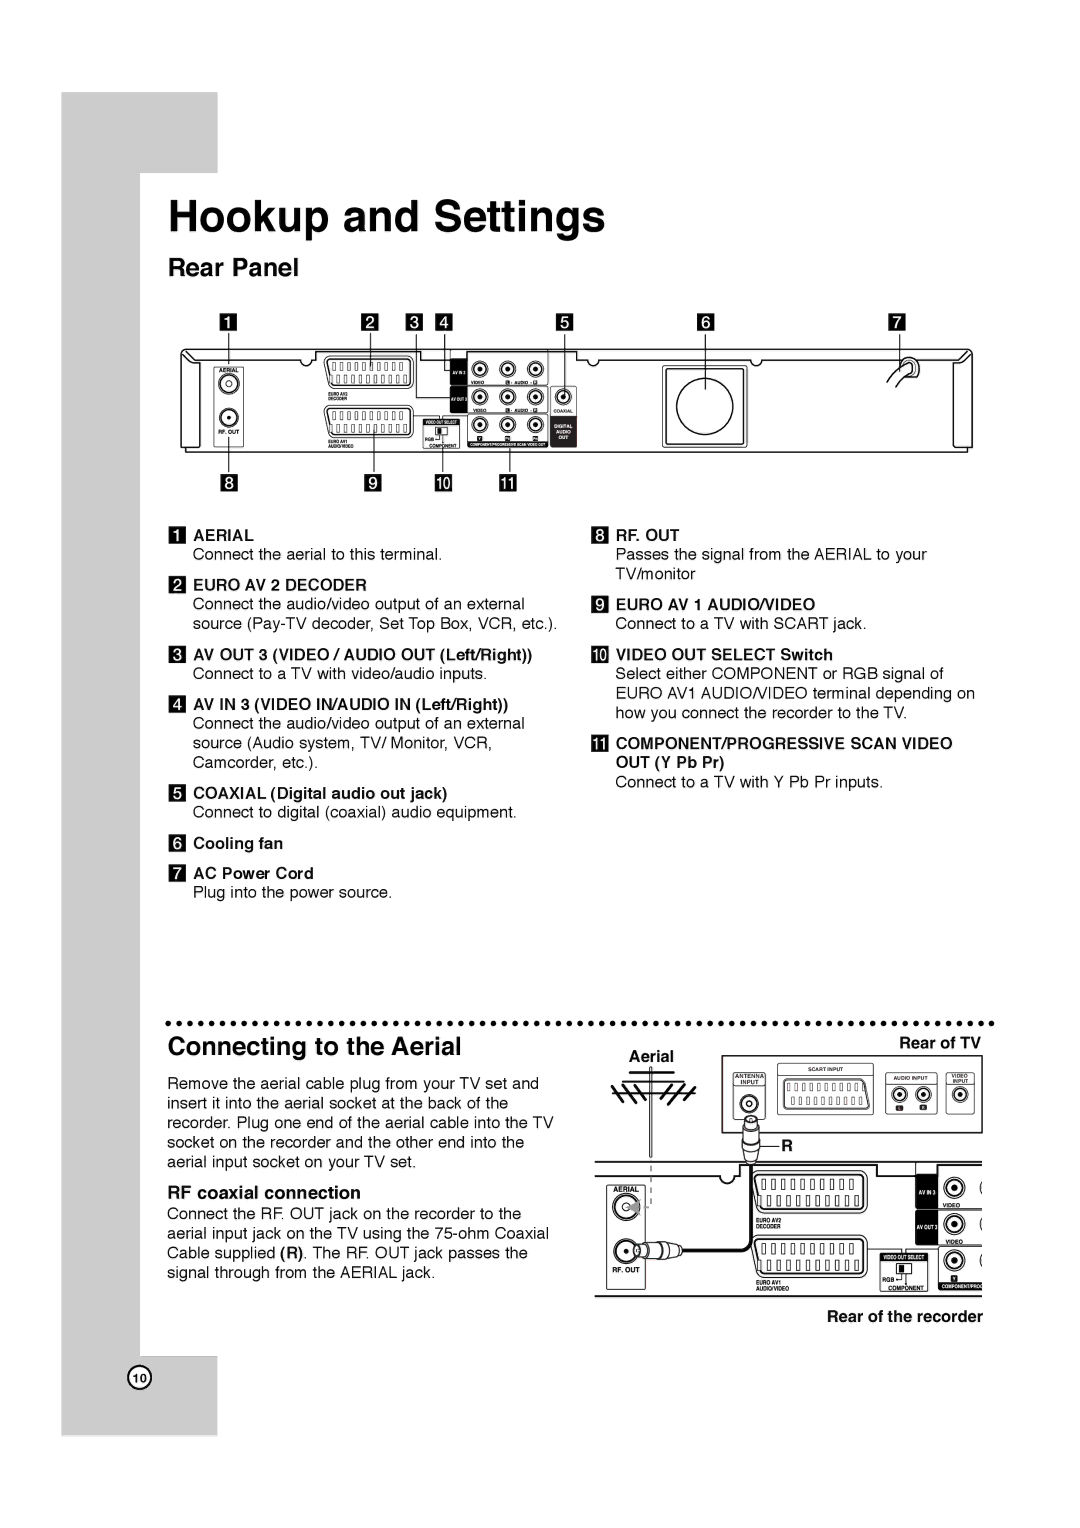 JVC LPT1132-001A manual Hookup and Settings, Rear Panel, Connecting to the Aerial, RF coaxial connection 